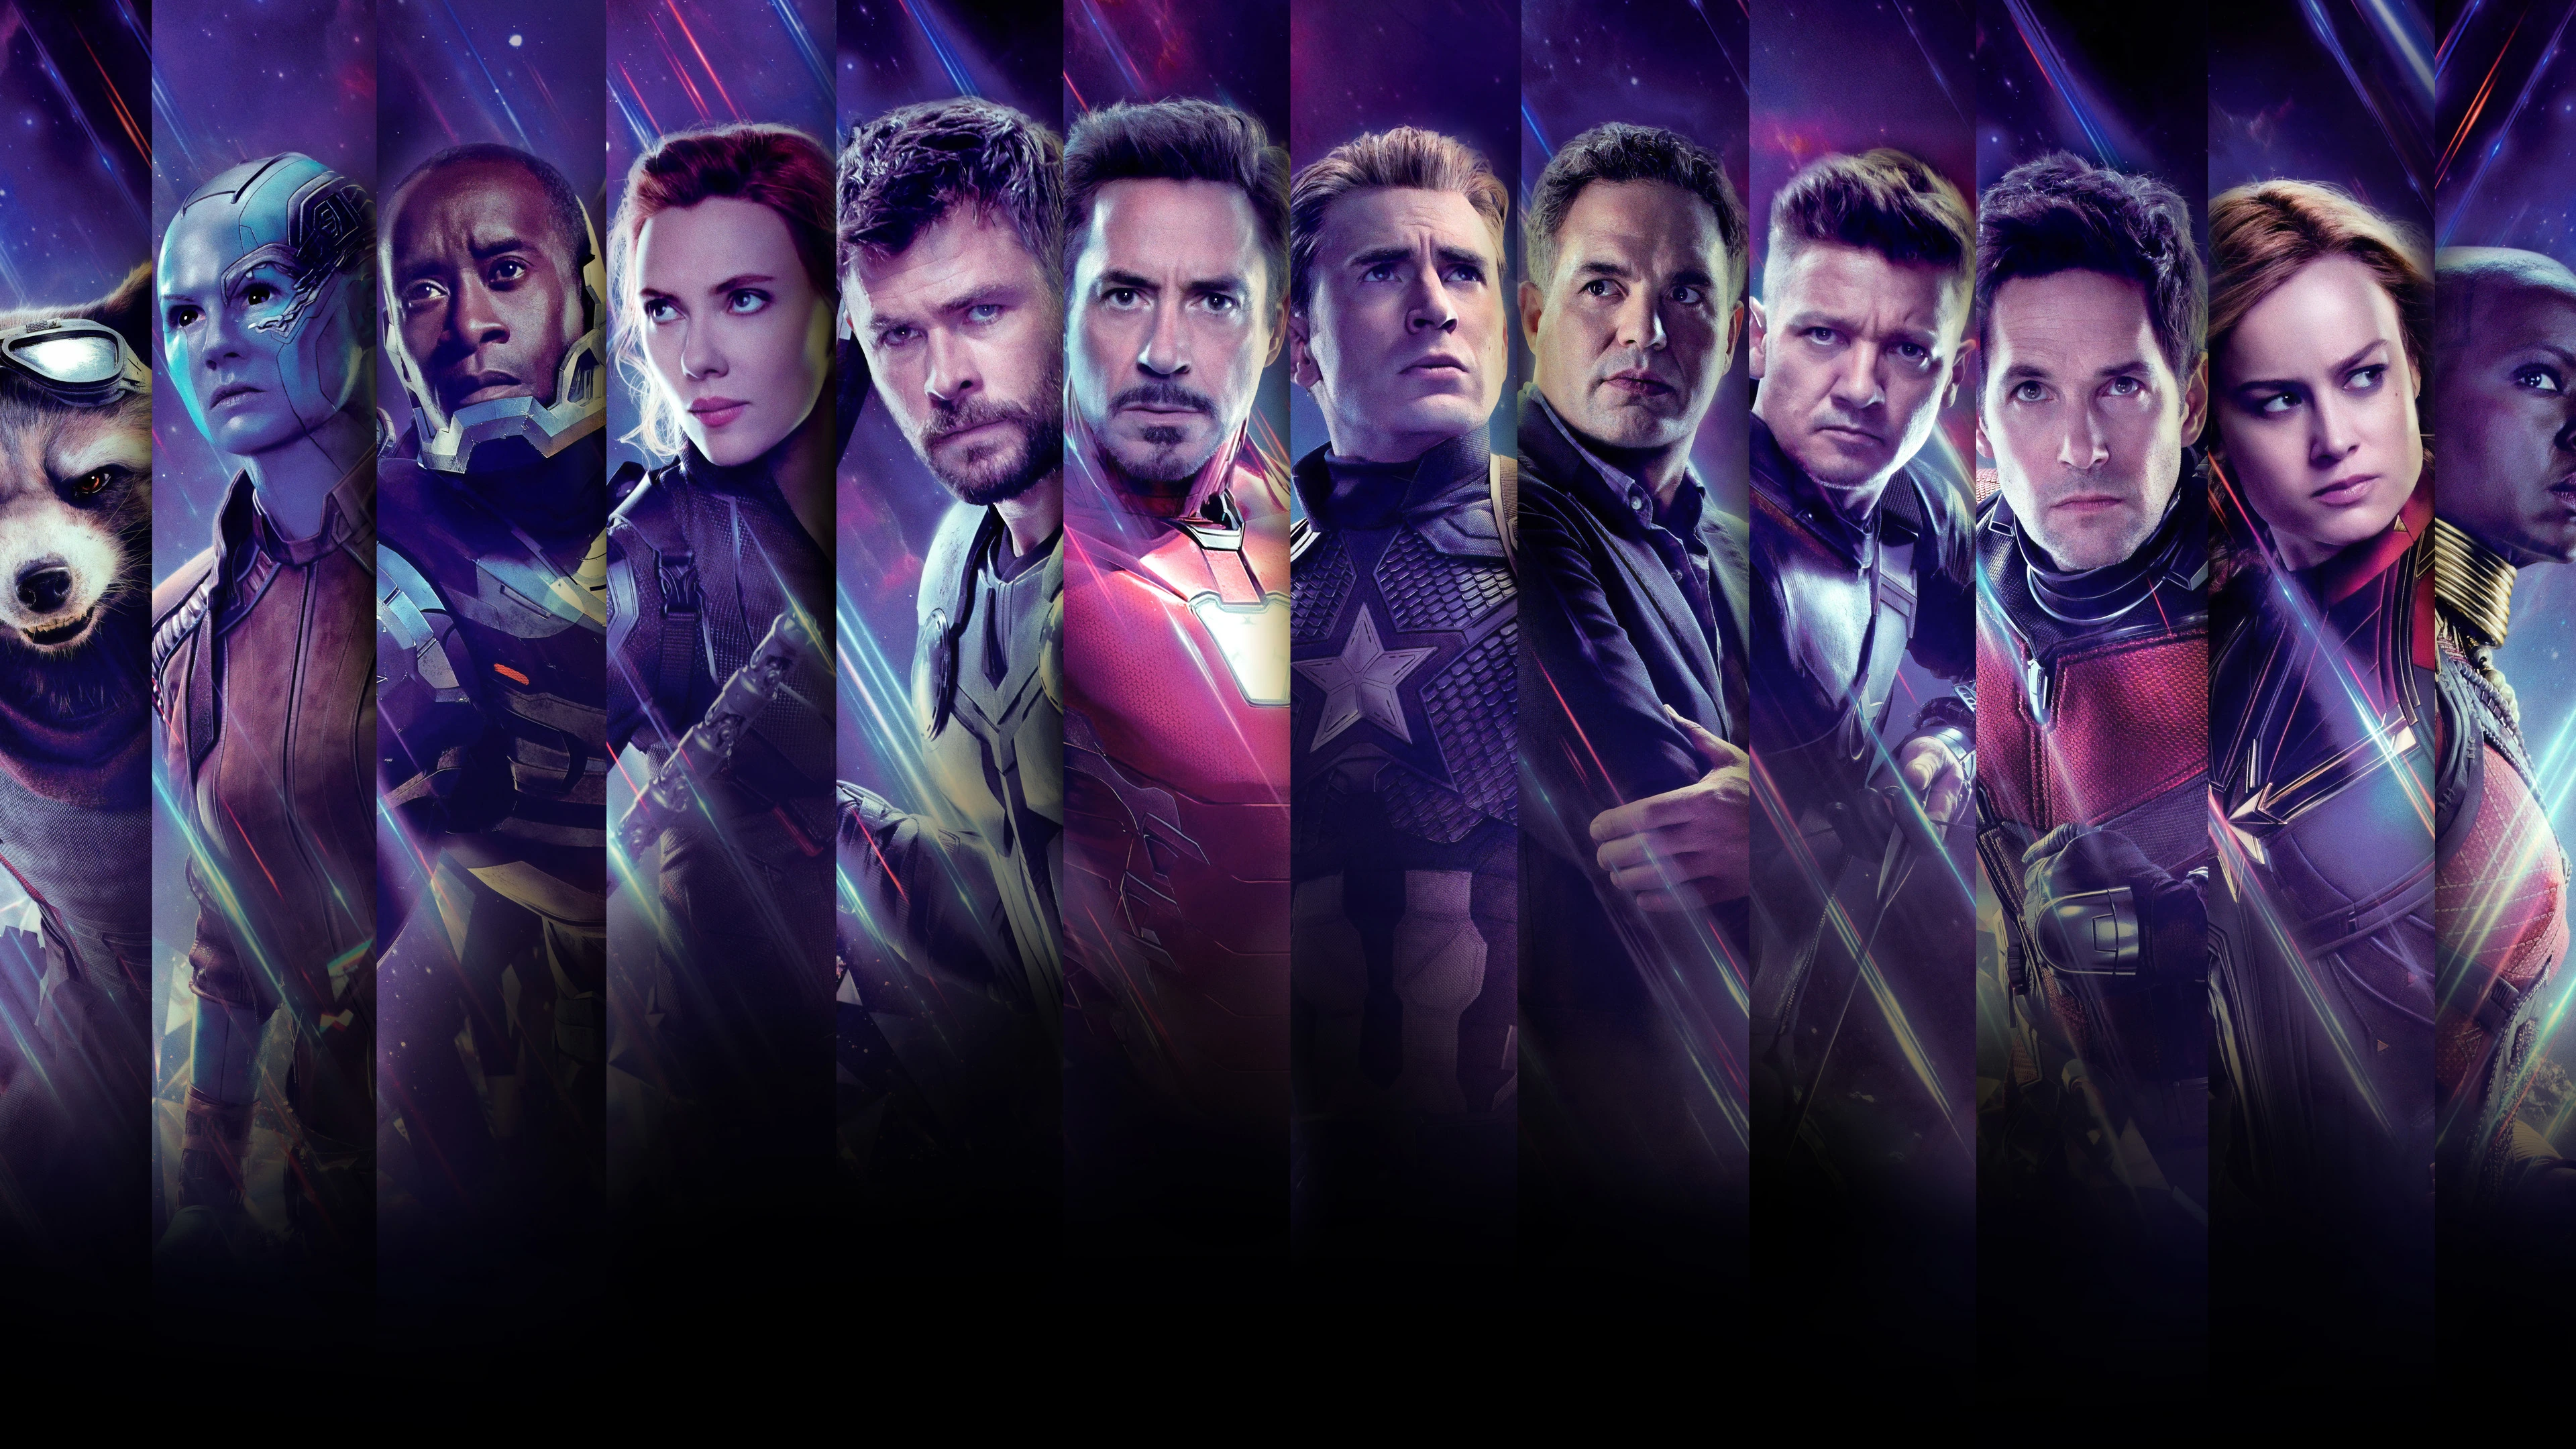 avengers end game collage poster 4k 1558220212 - Avengers End Game Collage Poster 4k - war machine wallpapers, thor wallpapers, thanos-wallpapers, superheroes wallpapers, rocket raccoon wallpapers, poster wallpapers, movies wallpapers, iron man wallpapers, hulk wallpapers, hd-wallpapers, hawkeye wallpapers, captain marvel wallpapers, captain america wallpapers, black widow wallpapers, avengers endgame wallpapers, avengers end game wallpapers, ant man wallpapers, 4k-wallpapers, 2019 movies wallpapers